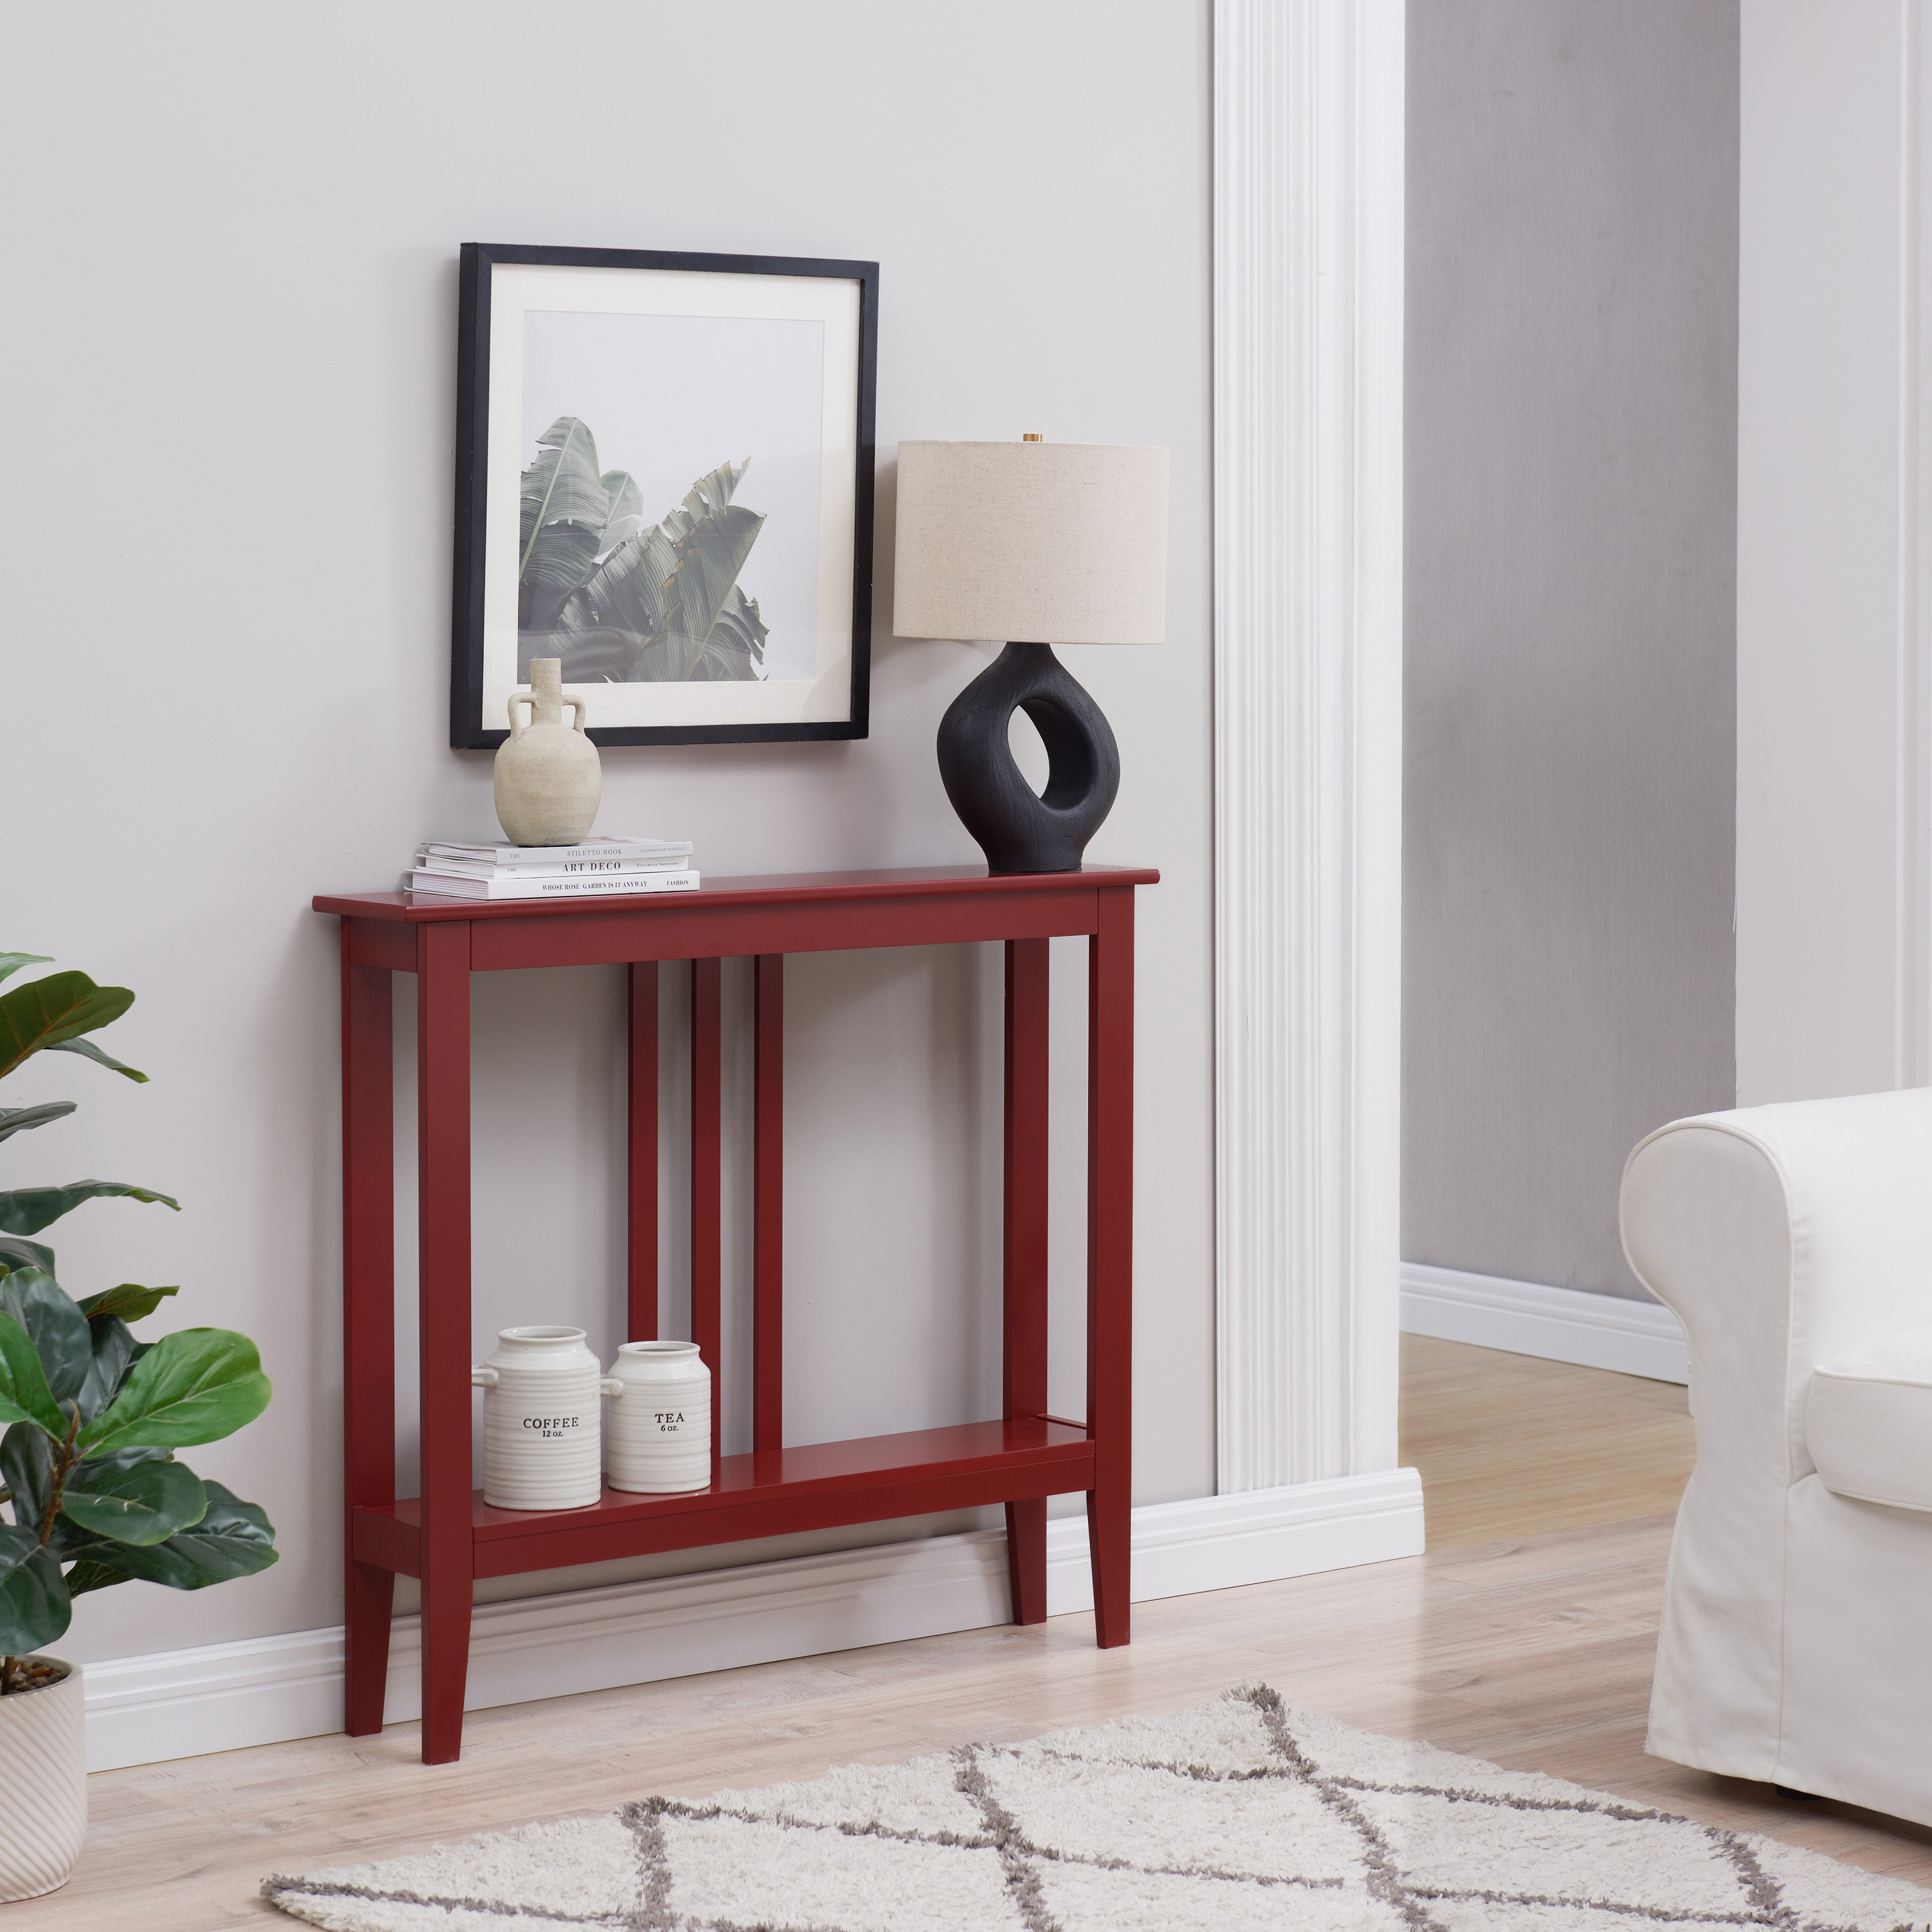 Balfour Console Table (Red)